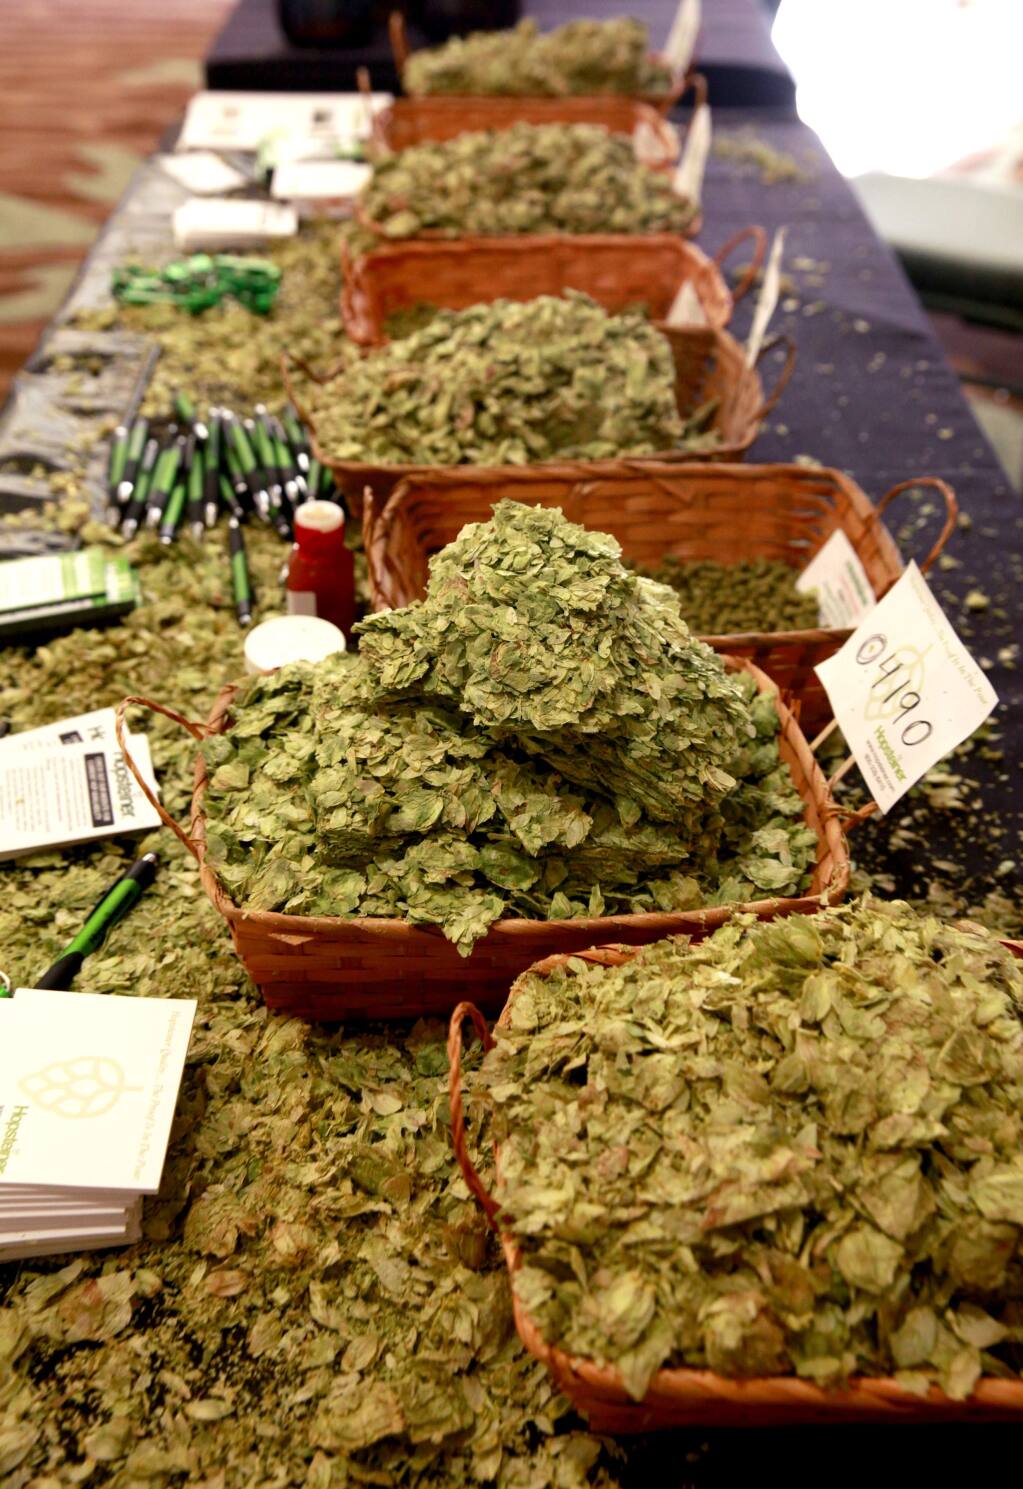 A variety of hops was on display at the Hopsteiner booth during a meeting of the California Craft Brewers Association at the Hyatt Vineyard Creek Hotel in Santa Rosa, California on Tuesday, November 4, 2014. (BETH SCHLANKER/ The Press Democrat)